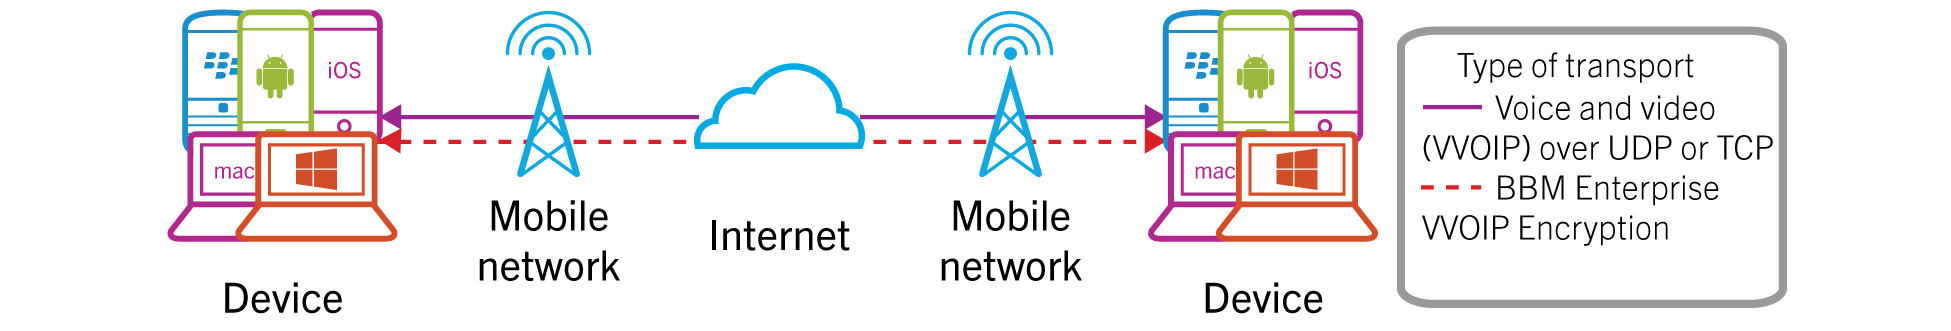 Architectural diagram showing how BBM Enterprise                        voice and video protects messages between a device on a mobile network and a                        device on a mobile network during data transfer